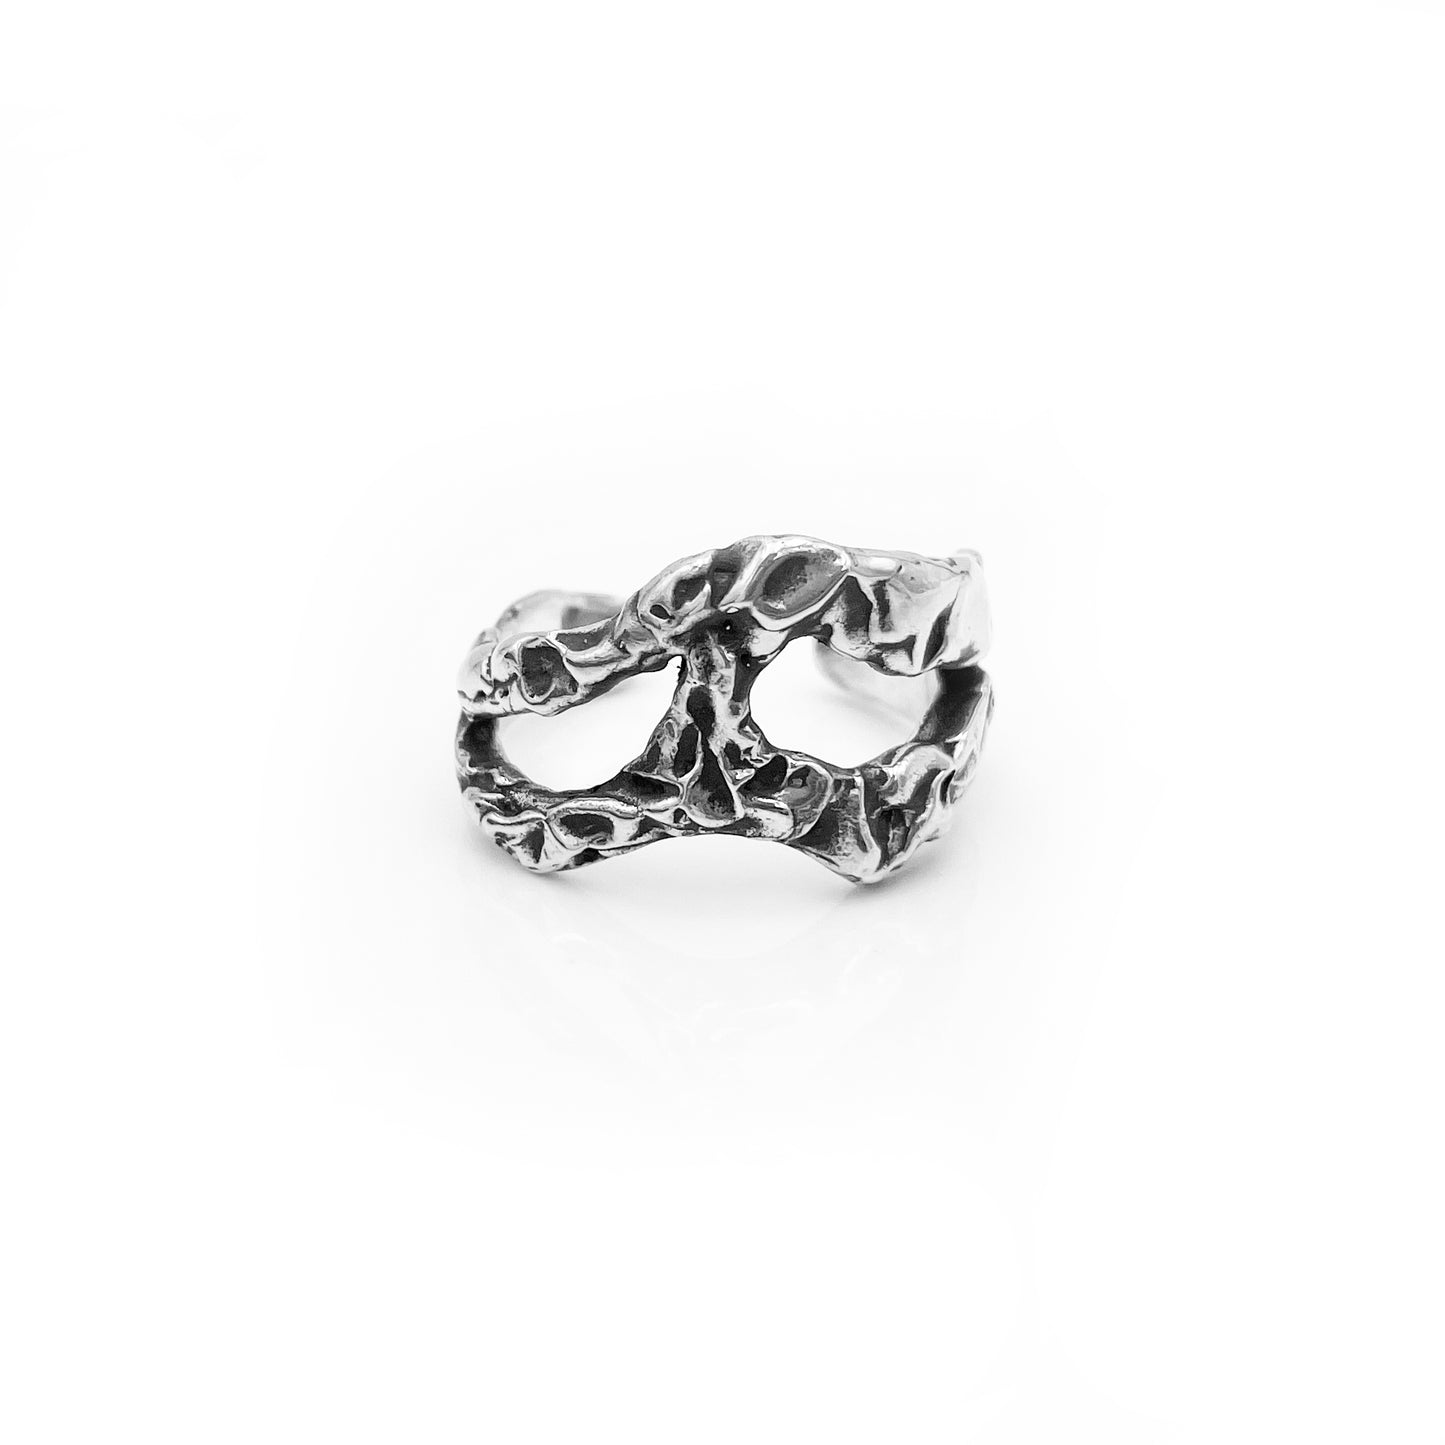 Sterling Silver Ring Phoenix - Timeless Silver Ring - Designer Ring - Everyday Silver Ring - Gorgeous Silver Ring - Casual Silver Ring